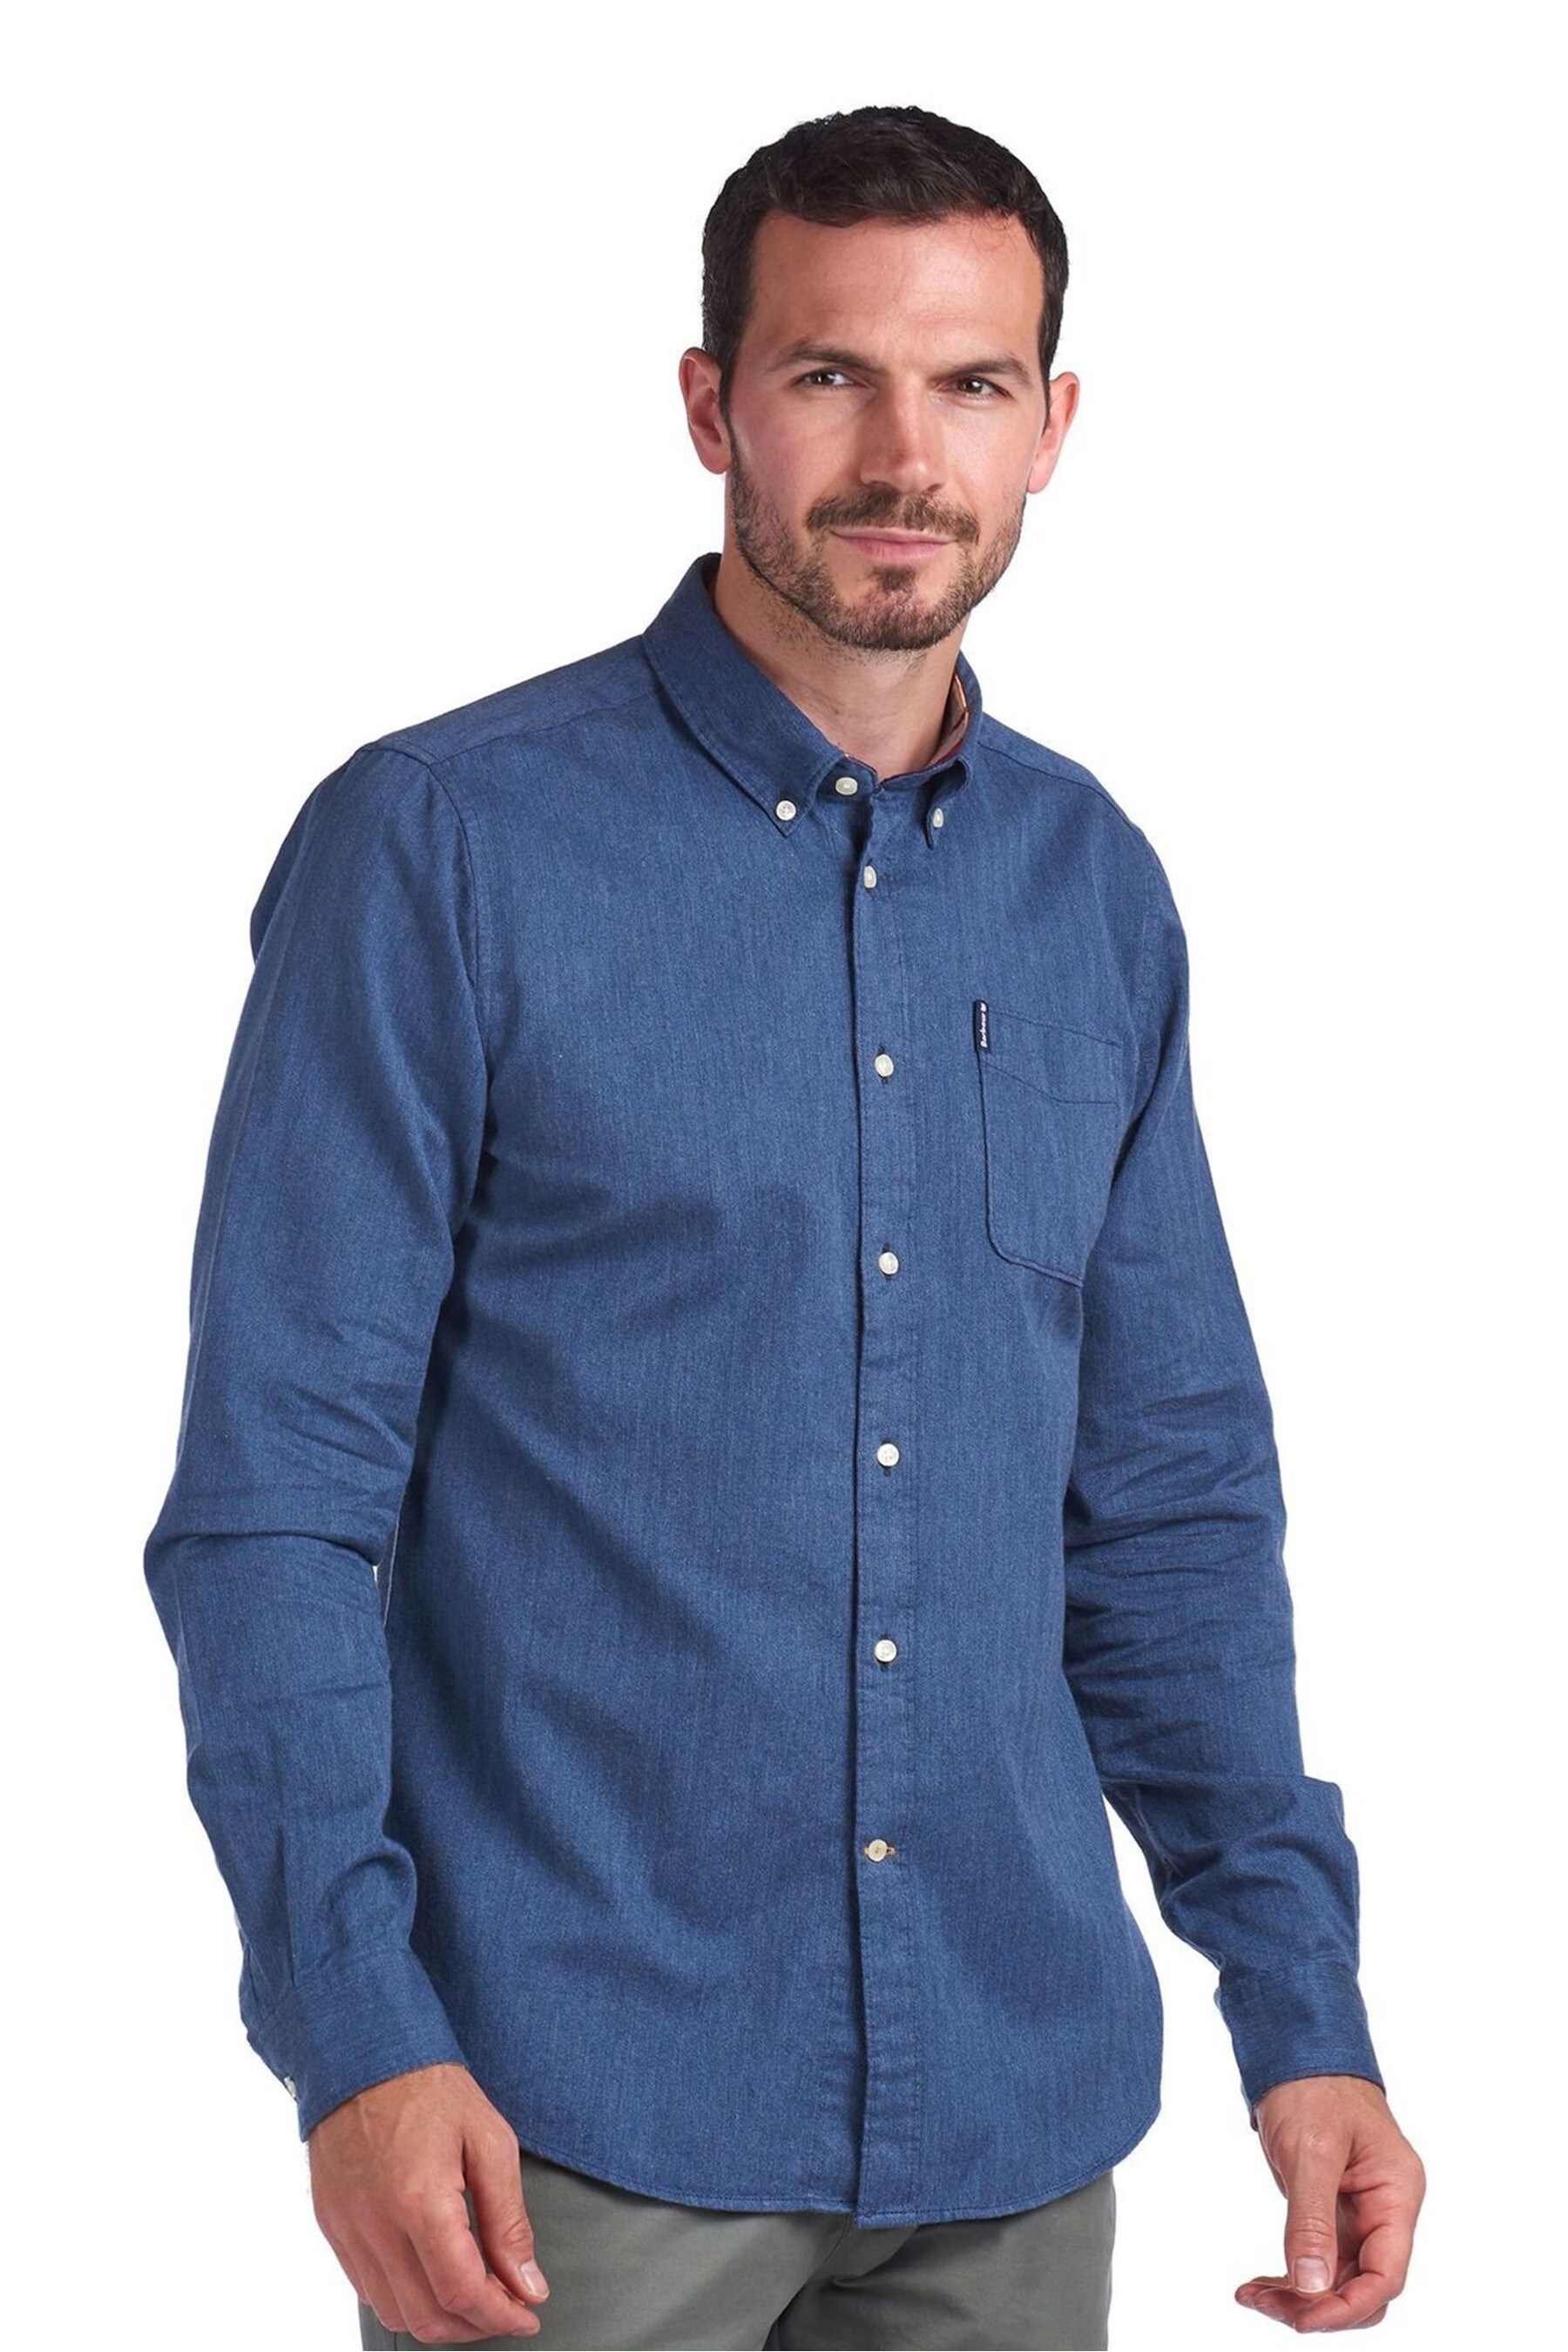 Buy Barbour® Blue Herringbone Tailored Shirt from the Next UK online shop